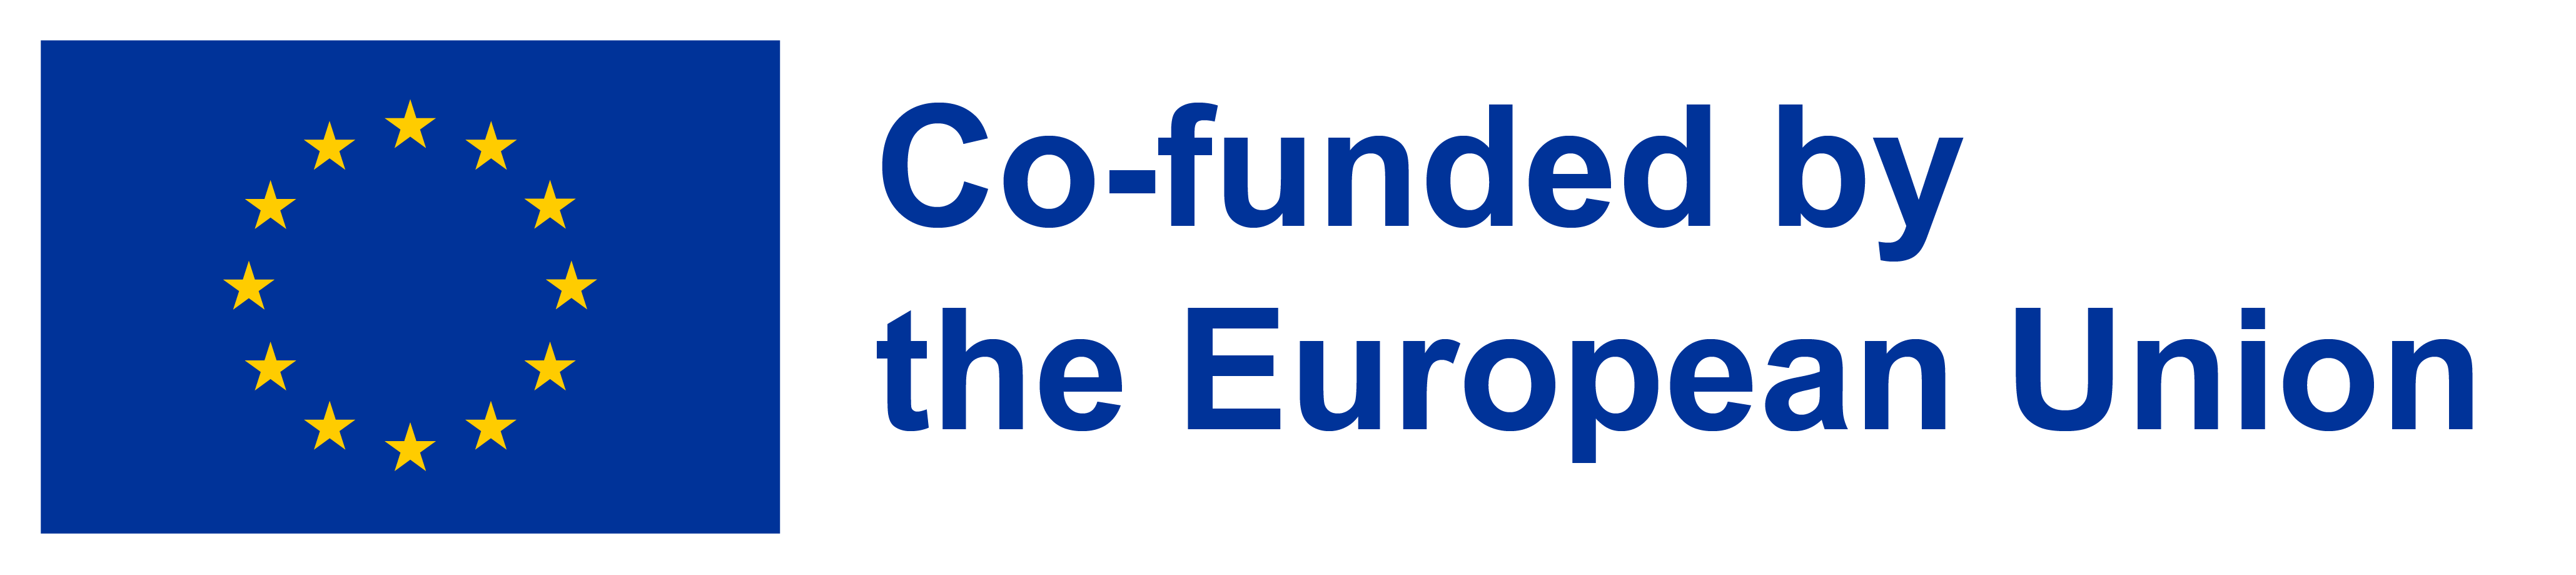 Match XR 2023 is co-funded by the European Union